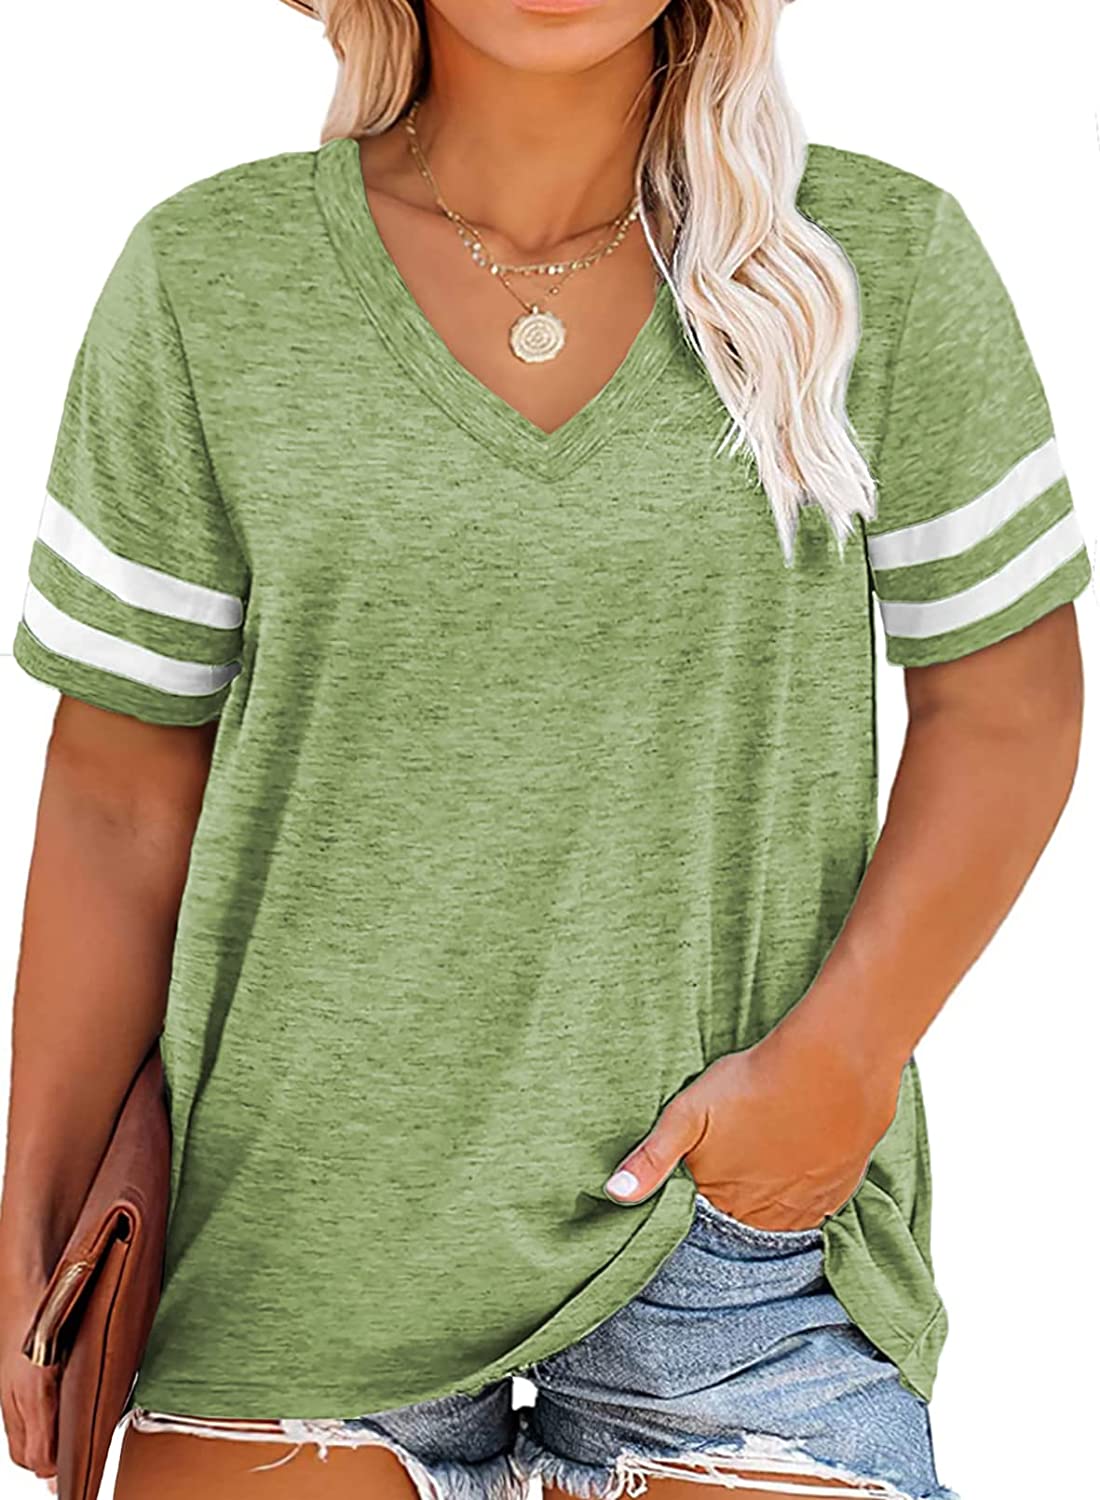 Happy Sailed Womens Plus Size Tunic Tops Summer Short Sleeve V Neck/Crew Neck Loose Casual Tee Shirt 1X-5X 